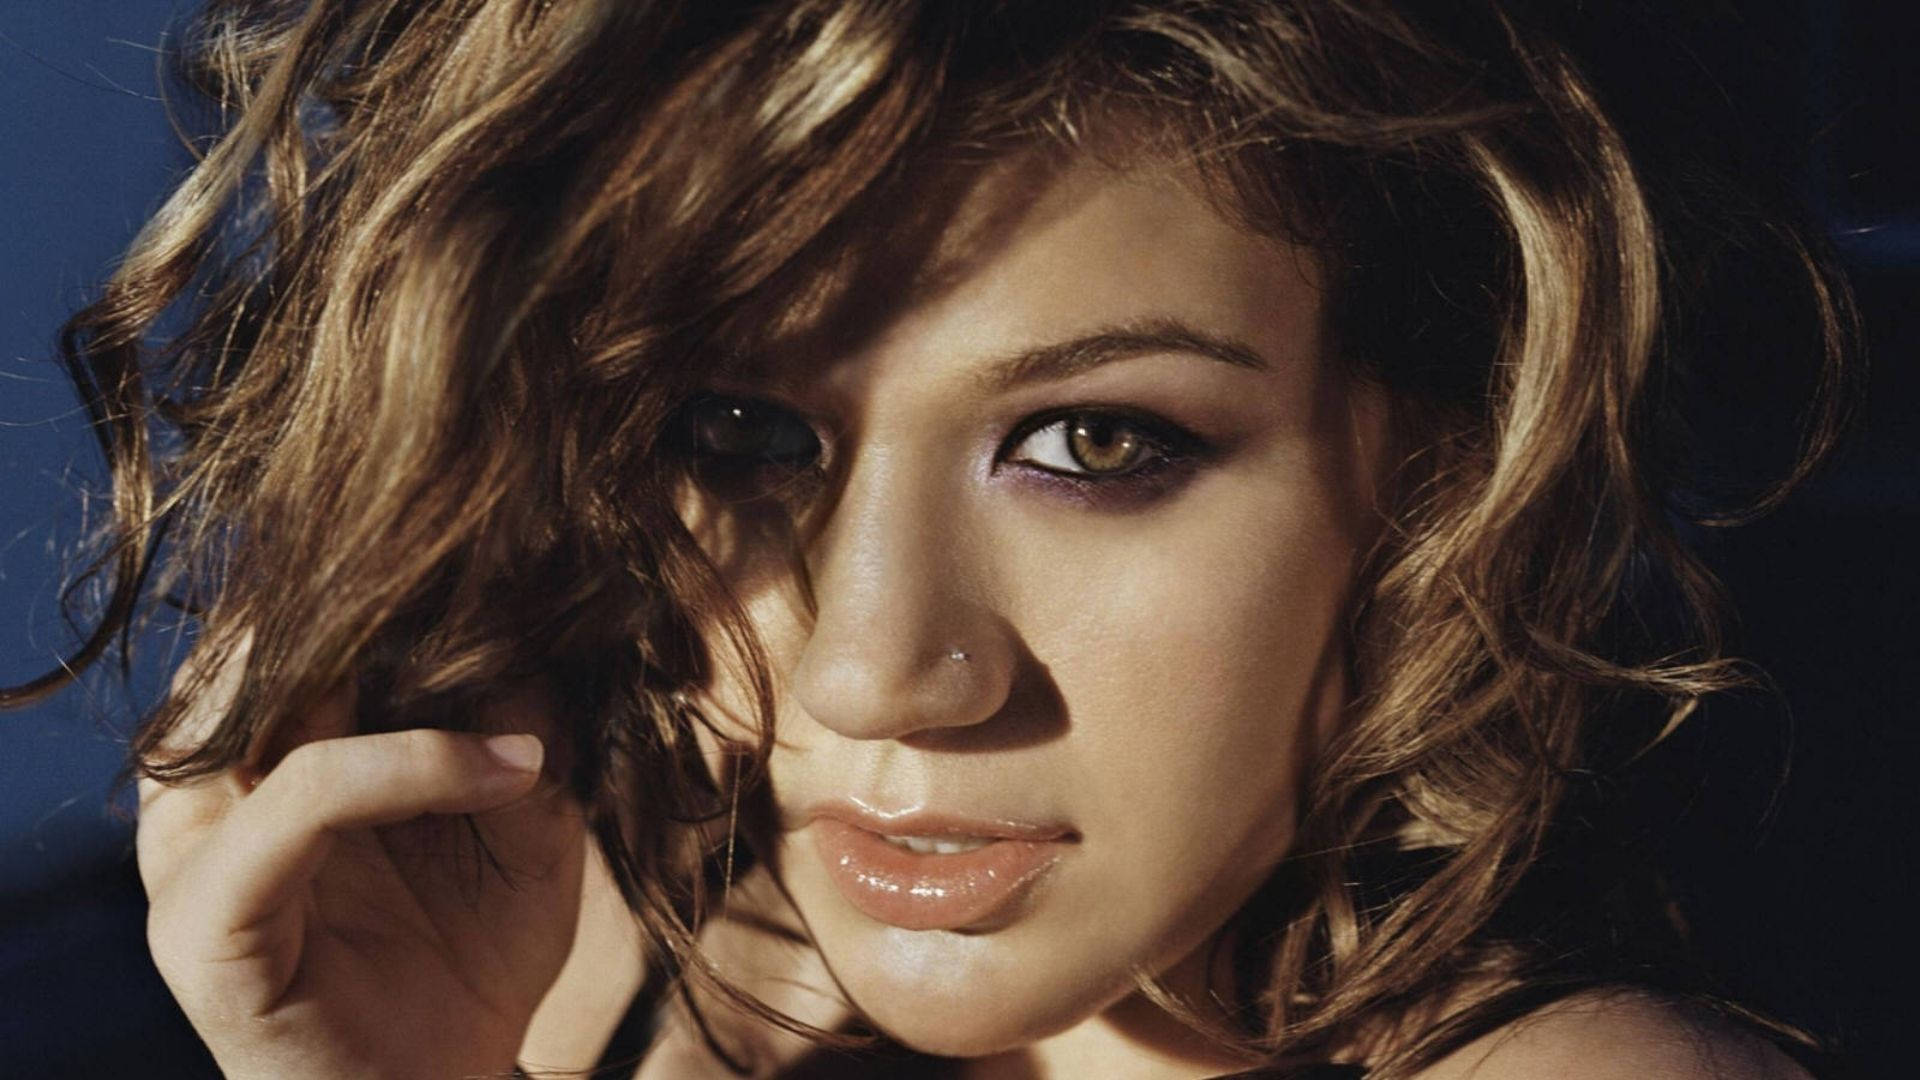 Kelly Clarkson Intimidating Stare Background